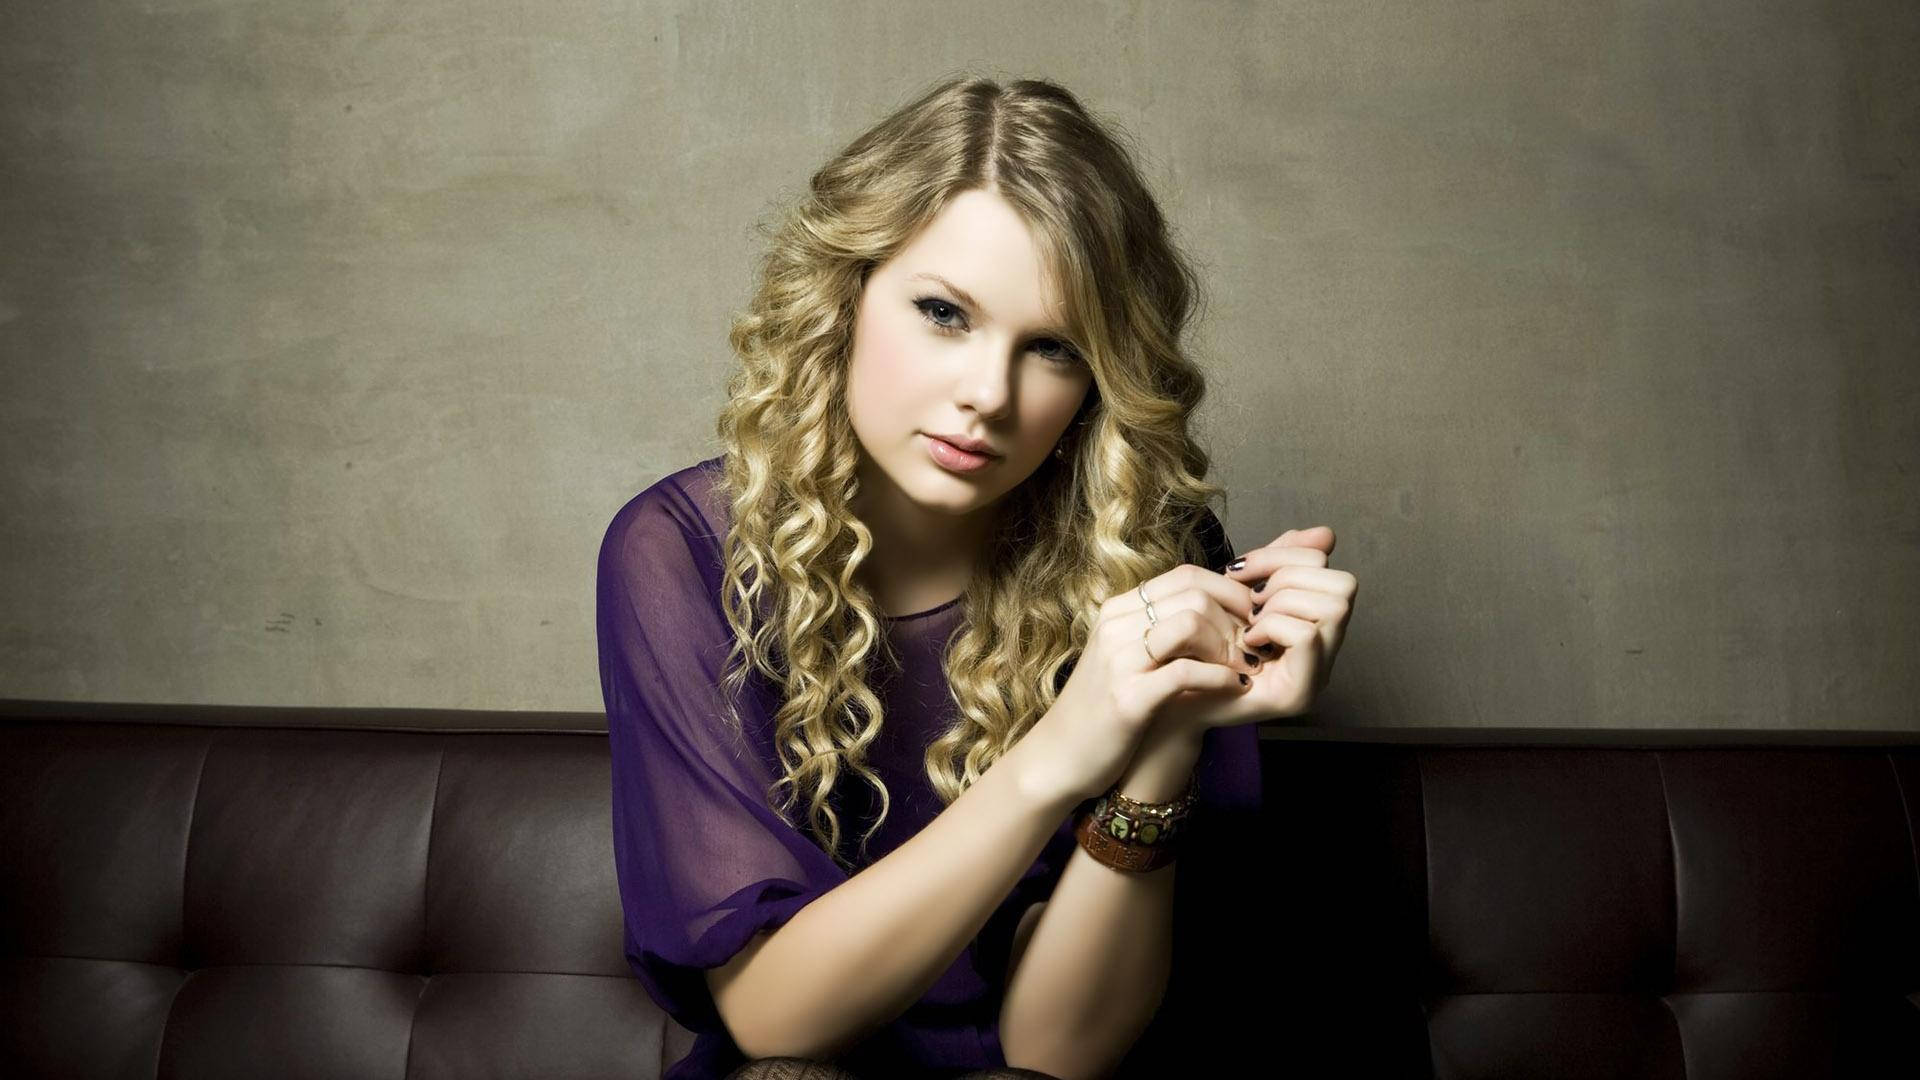 Taylor Swift radiating positive energy with her signature curly hair. Wallpaper